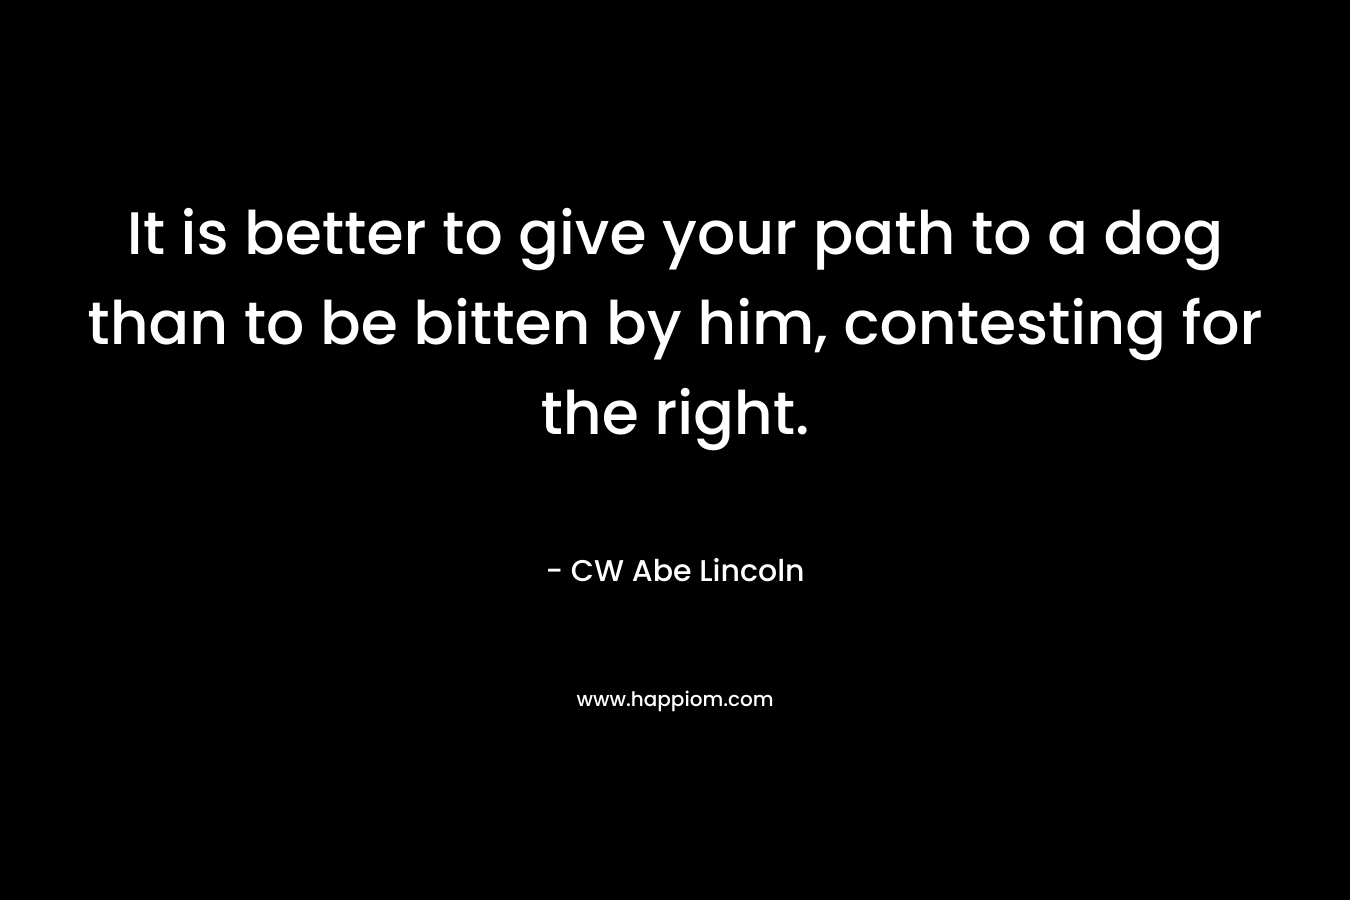 It is better to give your path to a dog than to be bitten by him, contesting for the right. – CW Abe Lincoln